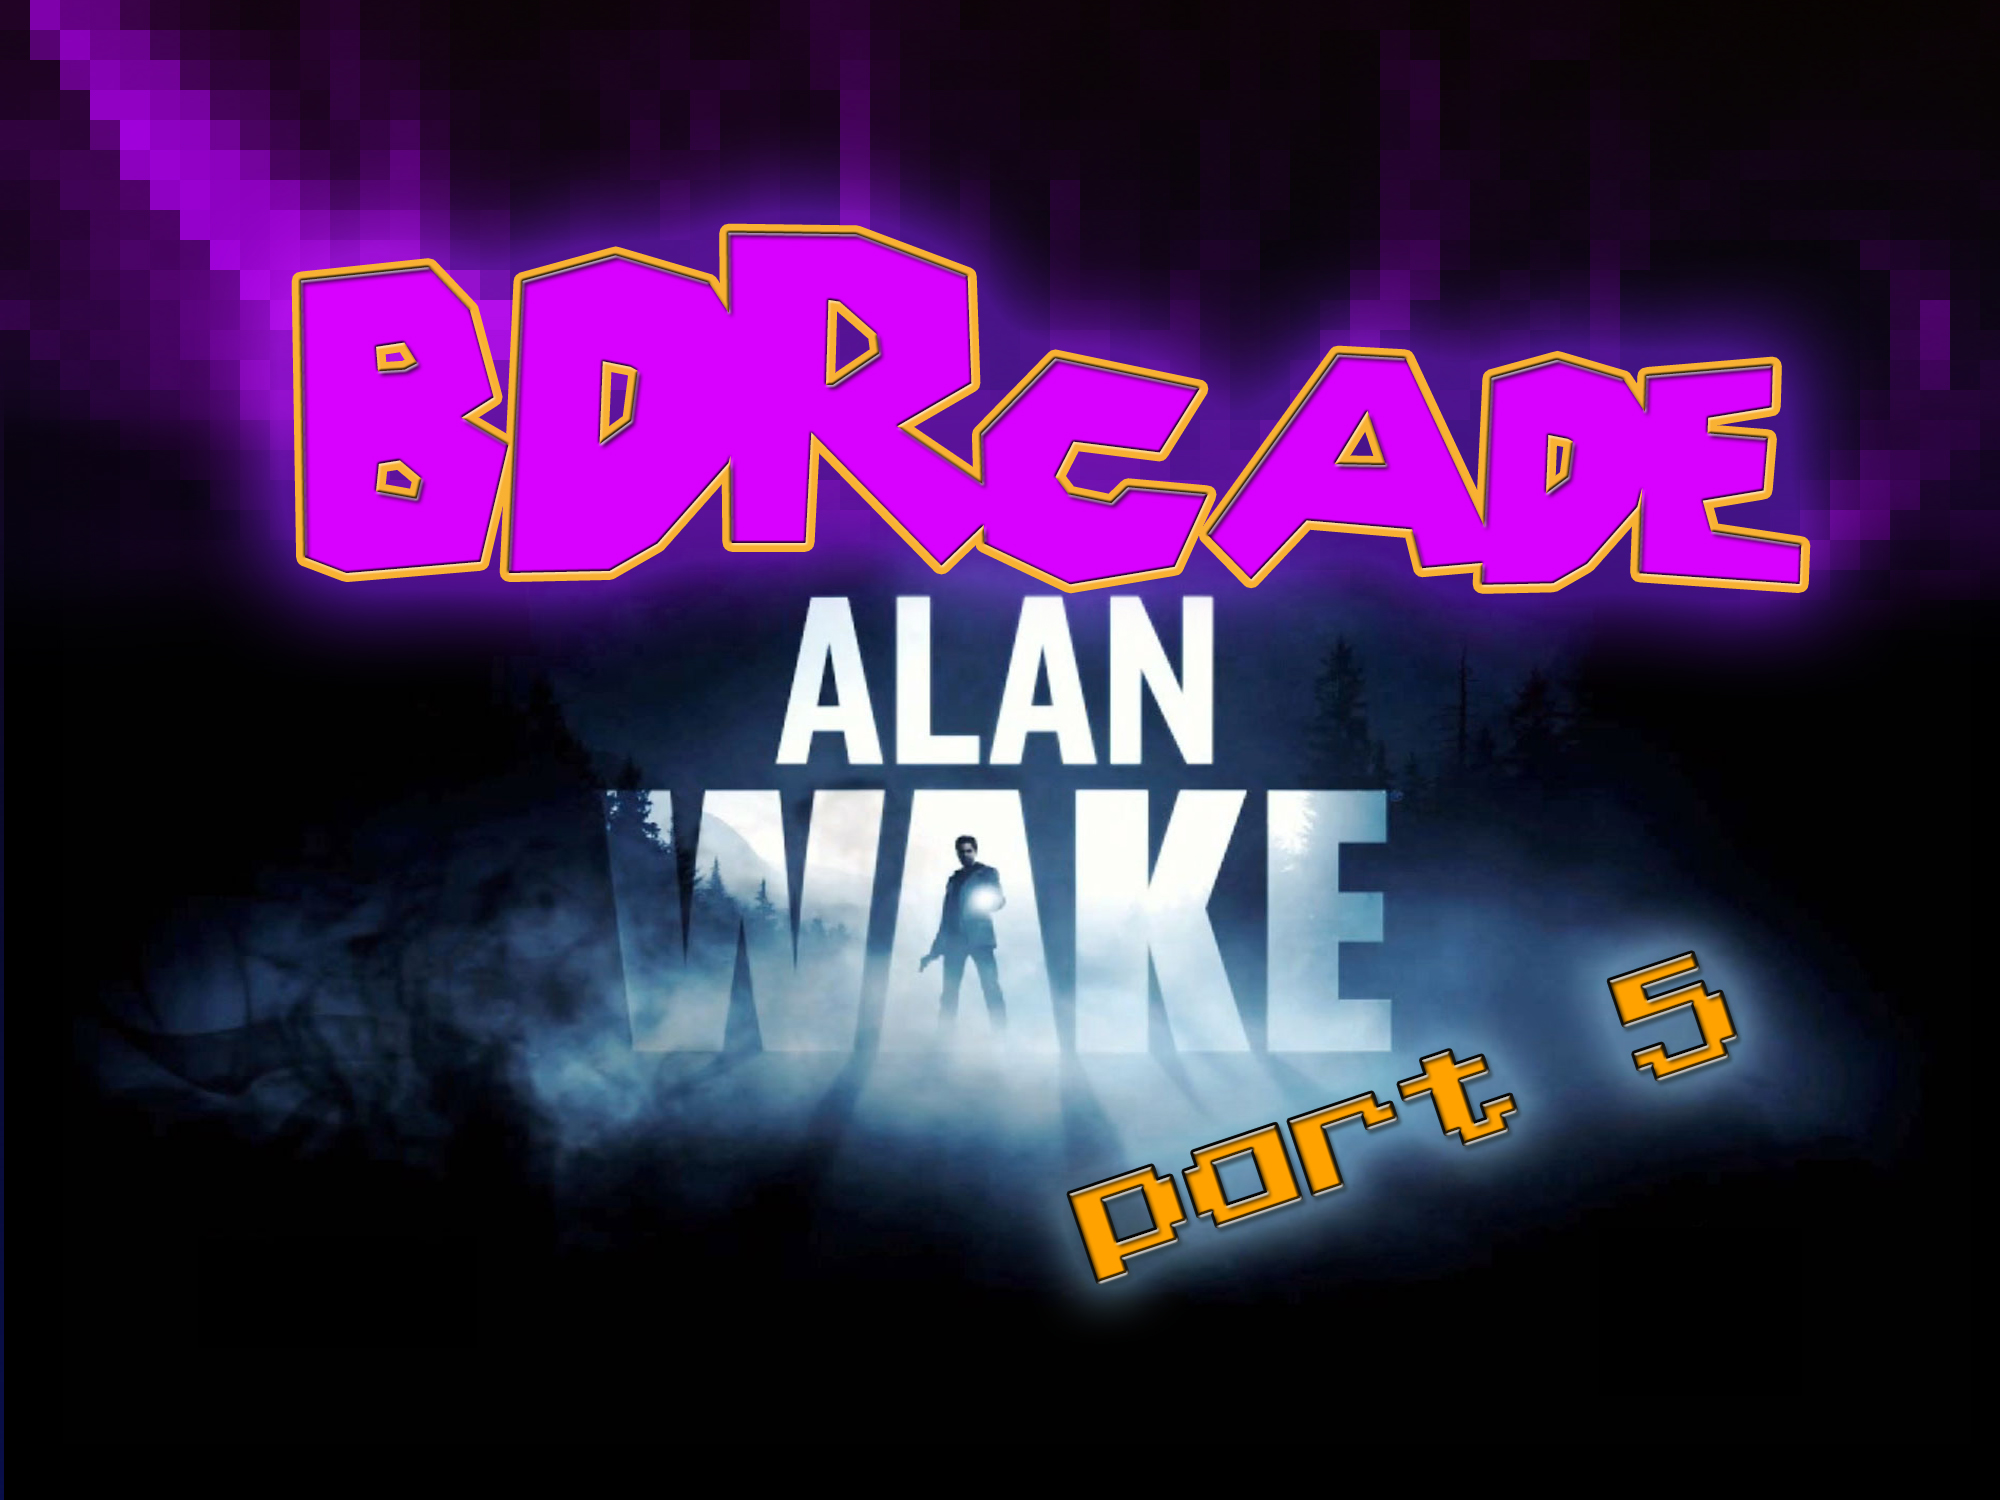 Alan Wake – Started From the Thermos Now I’m Here – PART 5- BDRcade